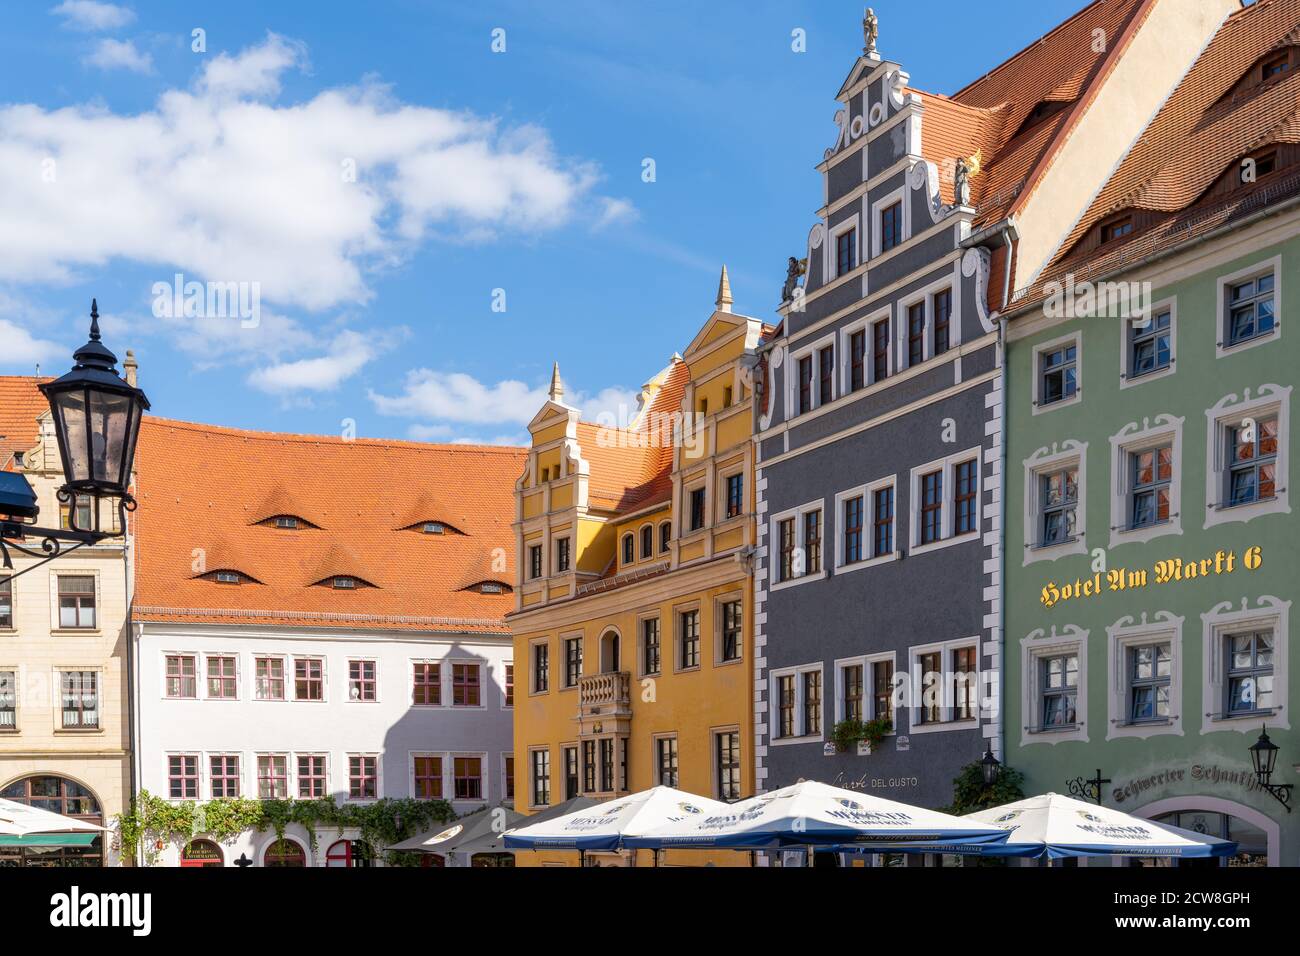 Meissen, Saxony / Germany - 10 September 2020: view of the town square in historic Meissen in Saxony Stock Photo